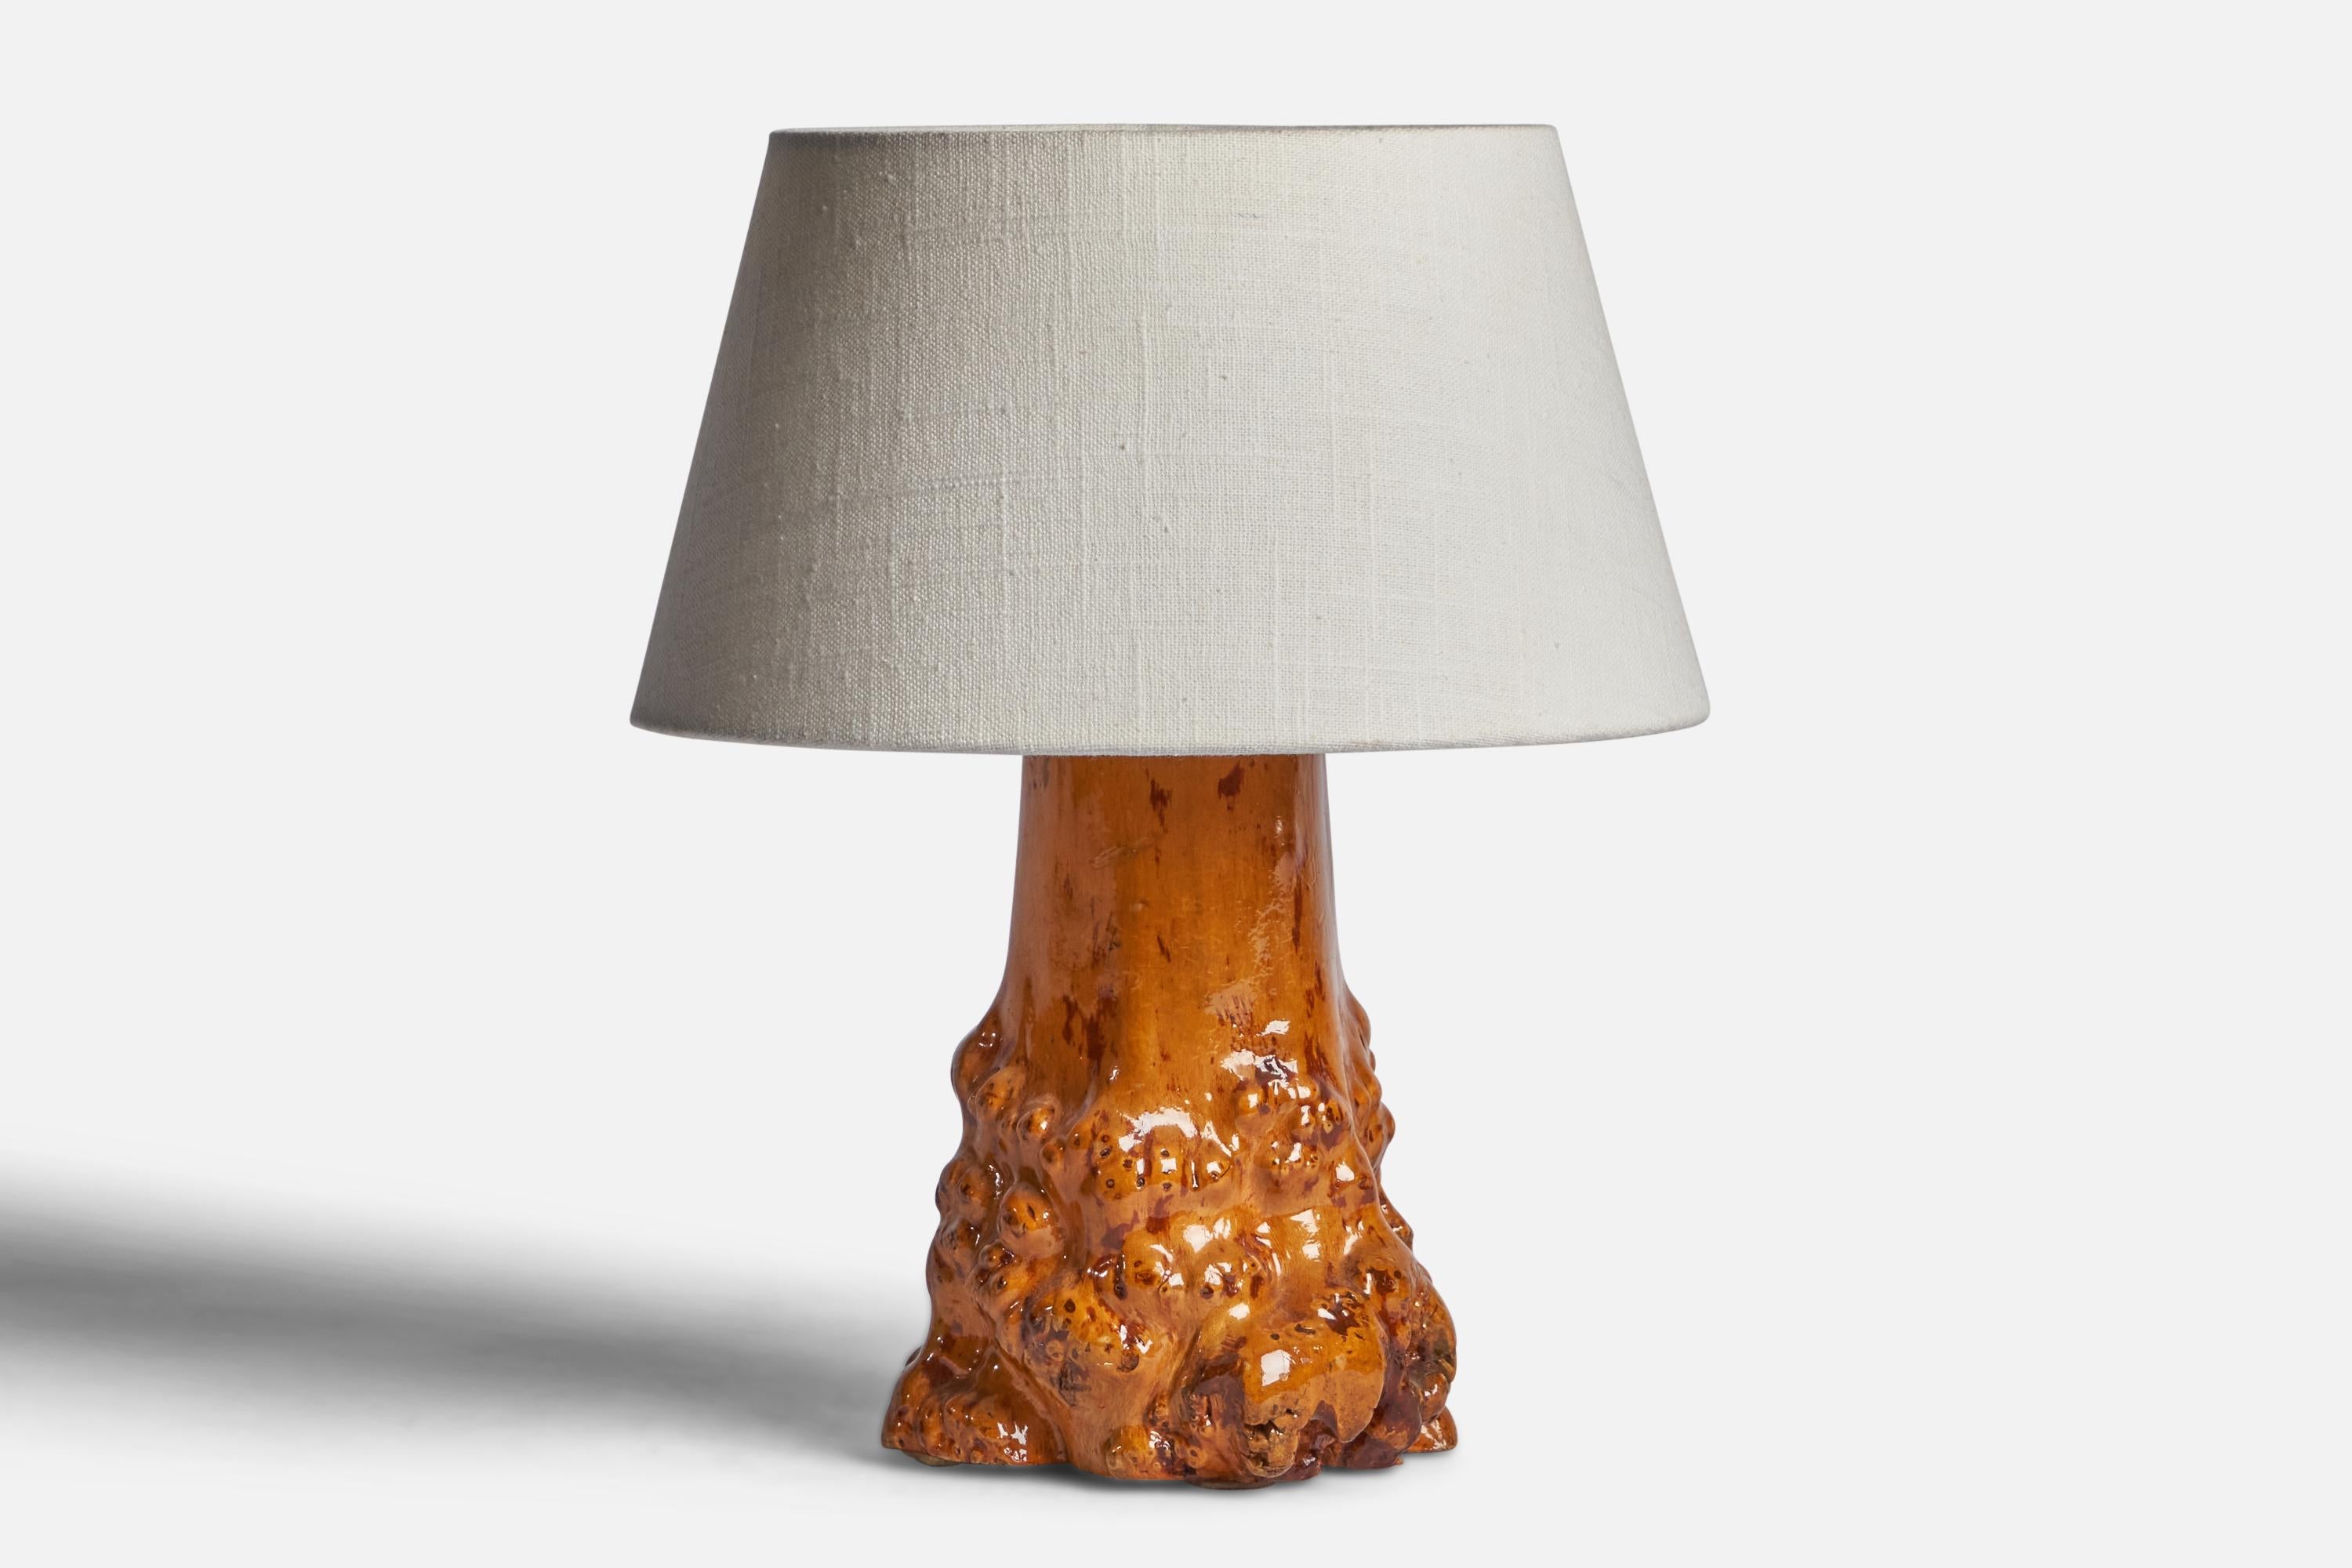 A burl wood table lamp designed and produced in Sweden, c. 1940s.

Dimensions of Lamp (inches): 9.65” H x 5.35” Diameter
Dimensions of Shade (inches): 7” Top Diameter x 10” Bottom Diameter x 5.5” H 
Dimensions of Lamp with Shade (inches): 12.5” H x